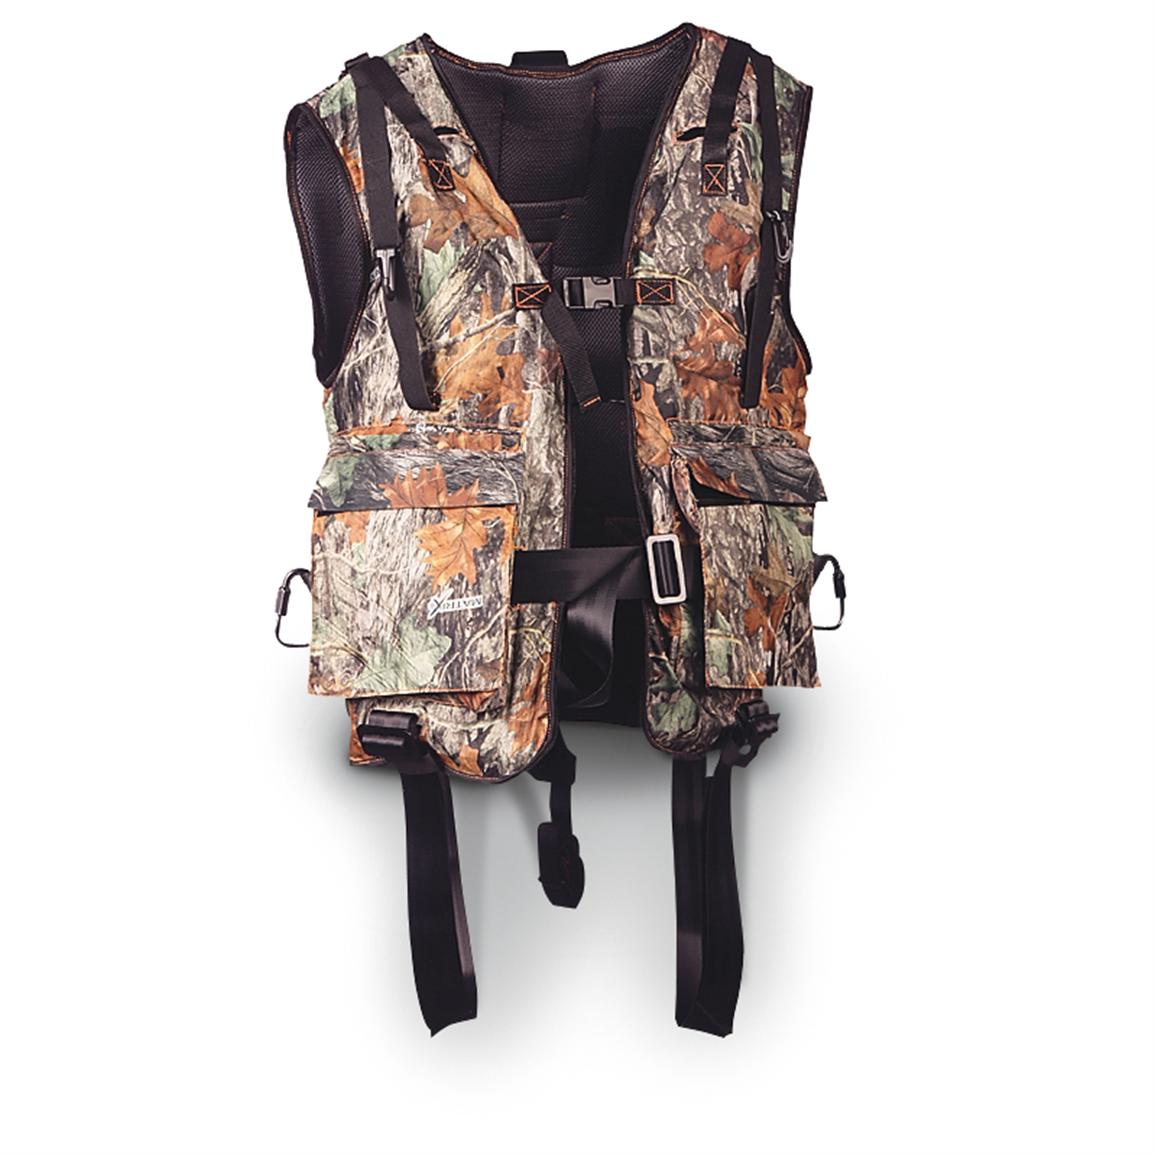 Details about   Big Game Safety Harness Model A130 Tree Stand Adjustable Full Body Hunting Hunt 